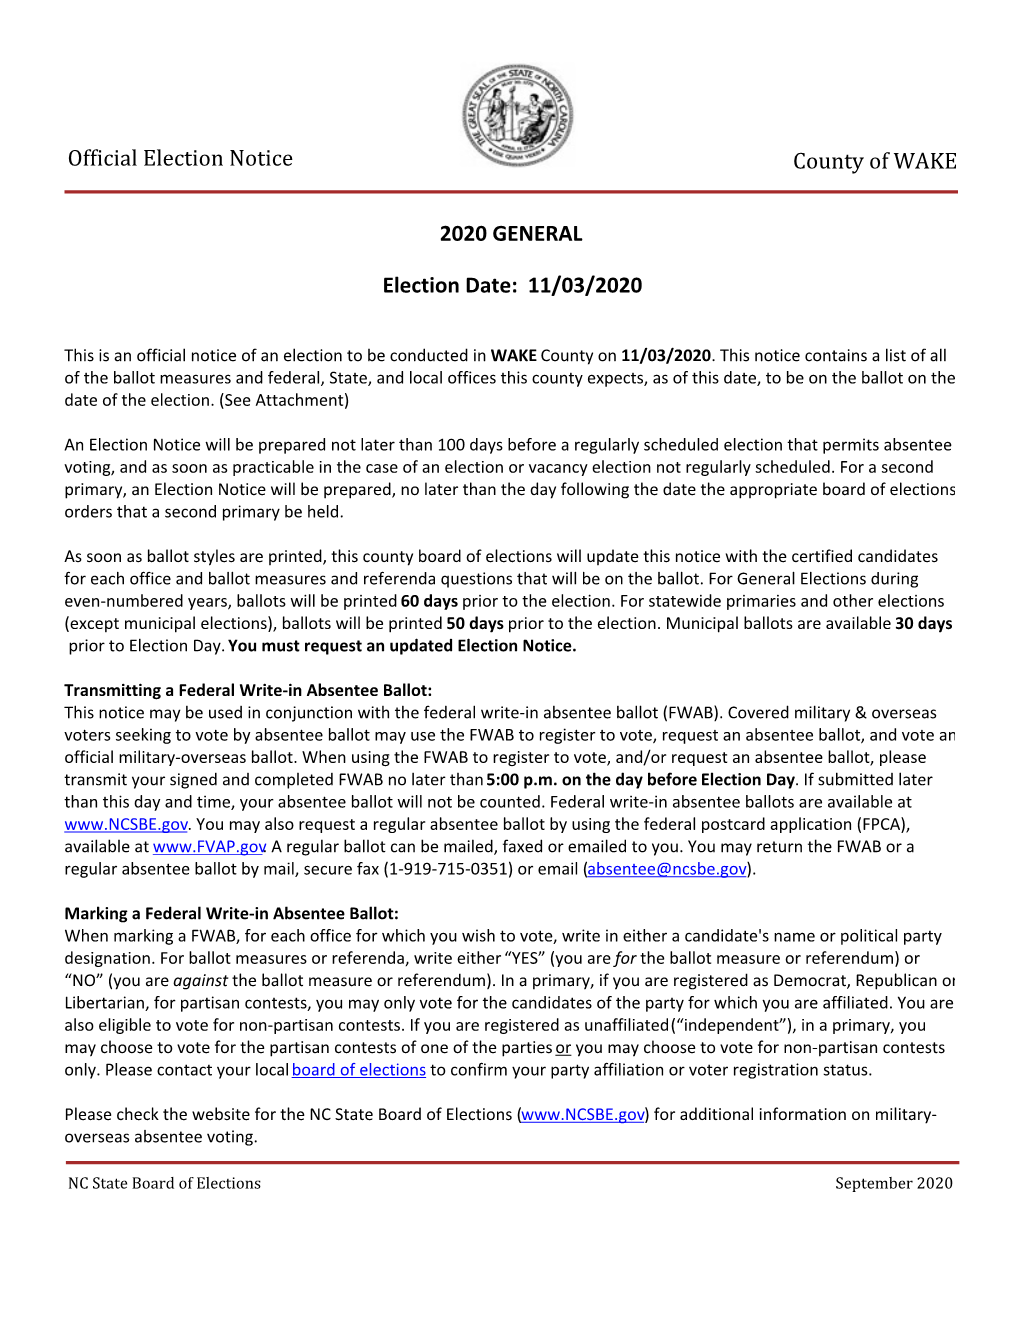 11/03/2020 County of WAKE Official Election Notice